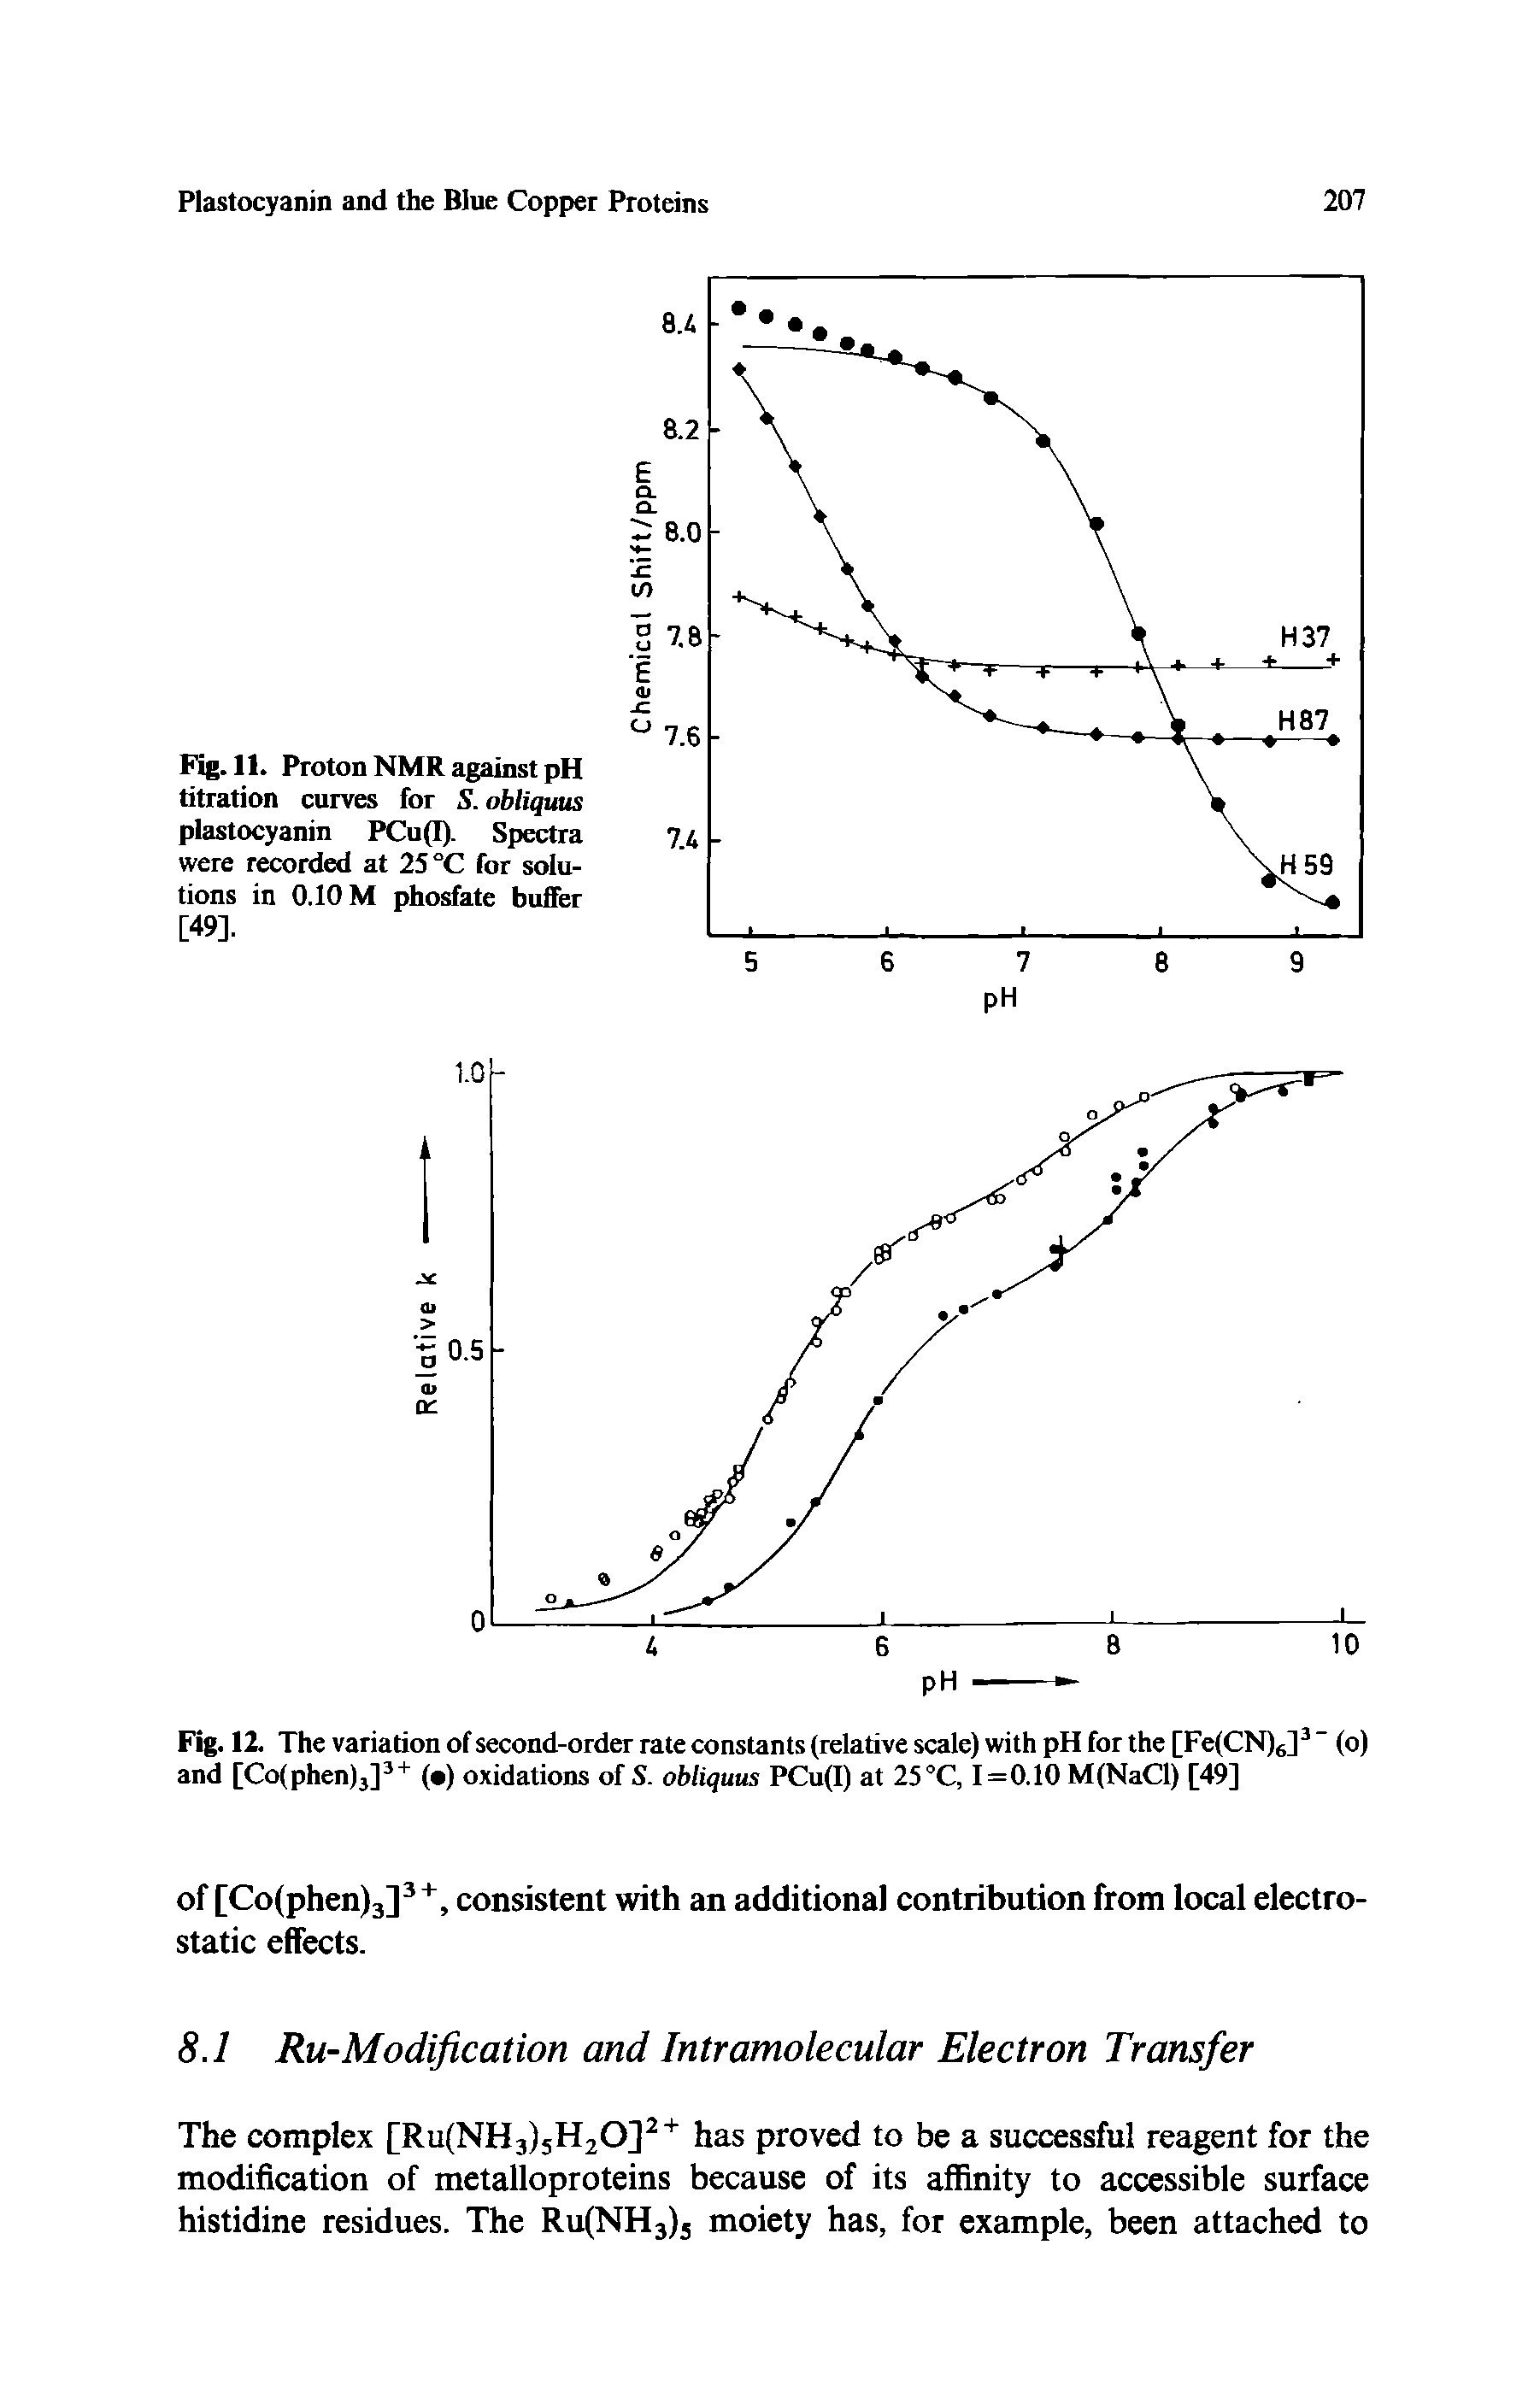 Fig. 12. The variation of second-order rate constants (relative scale) with pH for the [Fe(CN)6] (o) and [Colphenlj] ( ) oxidations of S. obliquus PCu(I) at 25 °C, 1=0.10 M(NaCl) [49]...